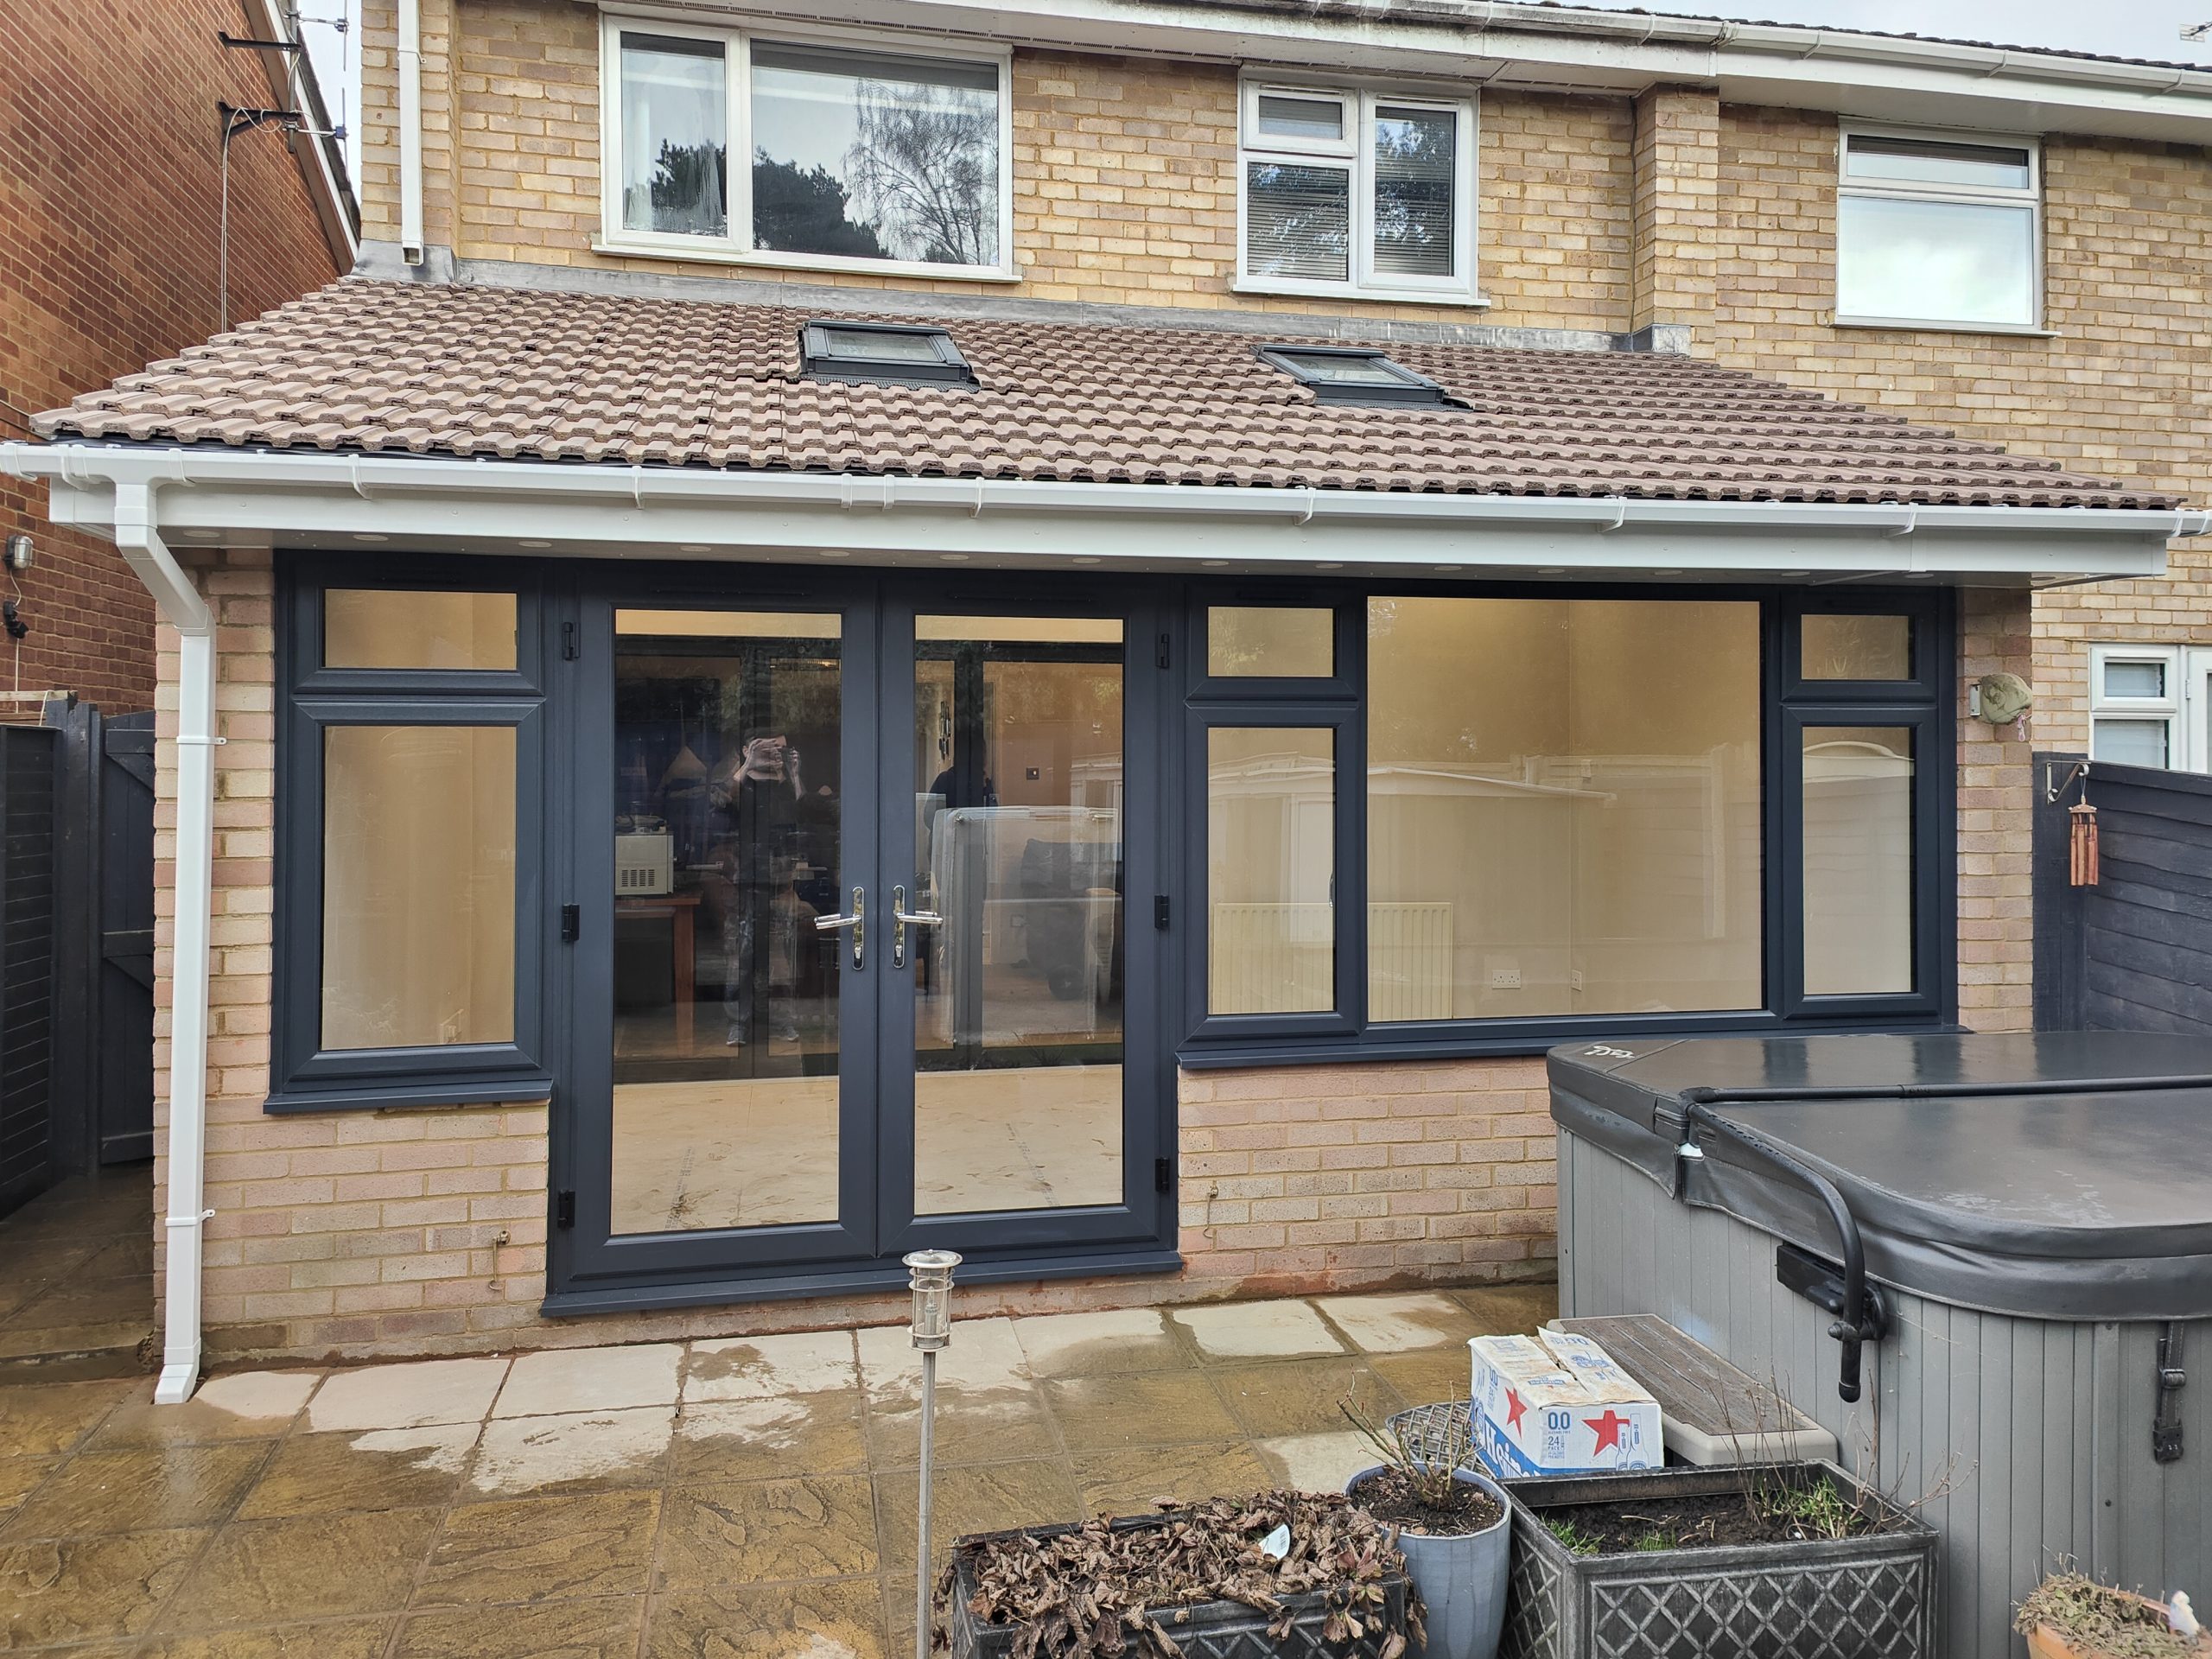 Yateley Builders Red Maple Design & Build Farnborough Conservatory build redesign Extension